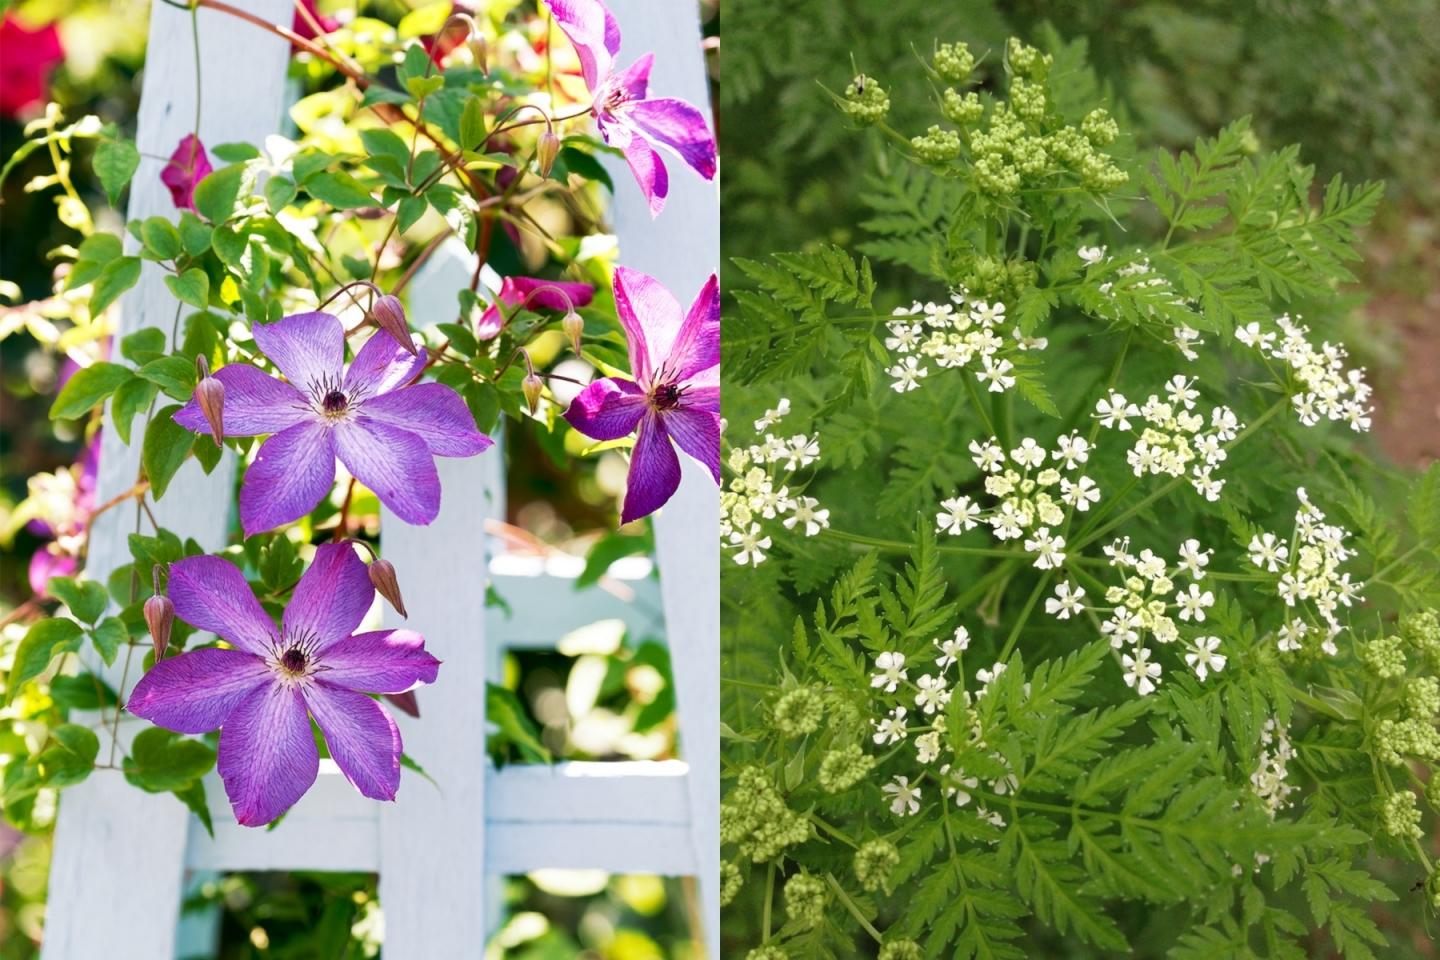 Left: The Clematis Meghan, named after the Duchess of Sussex, unveiled this year; right: wild flowers